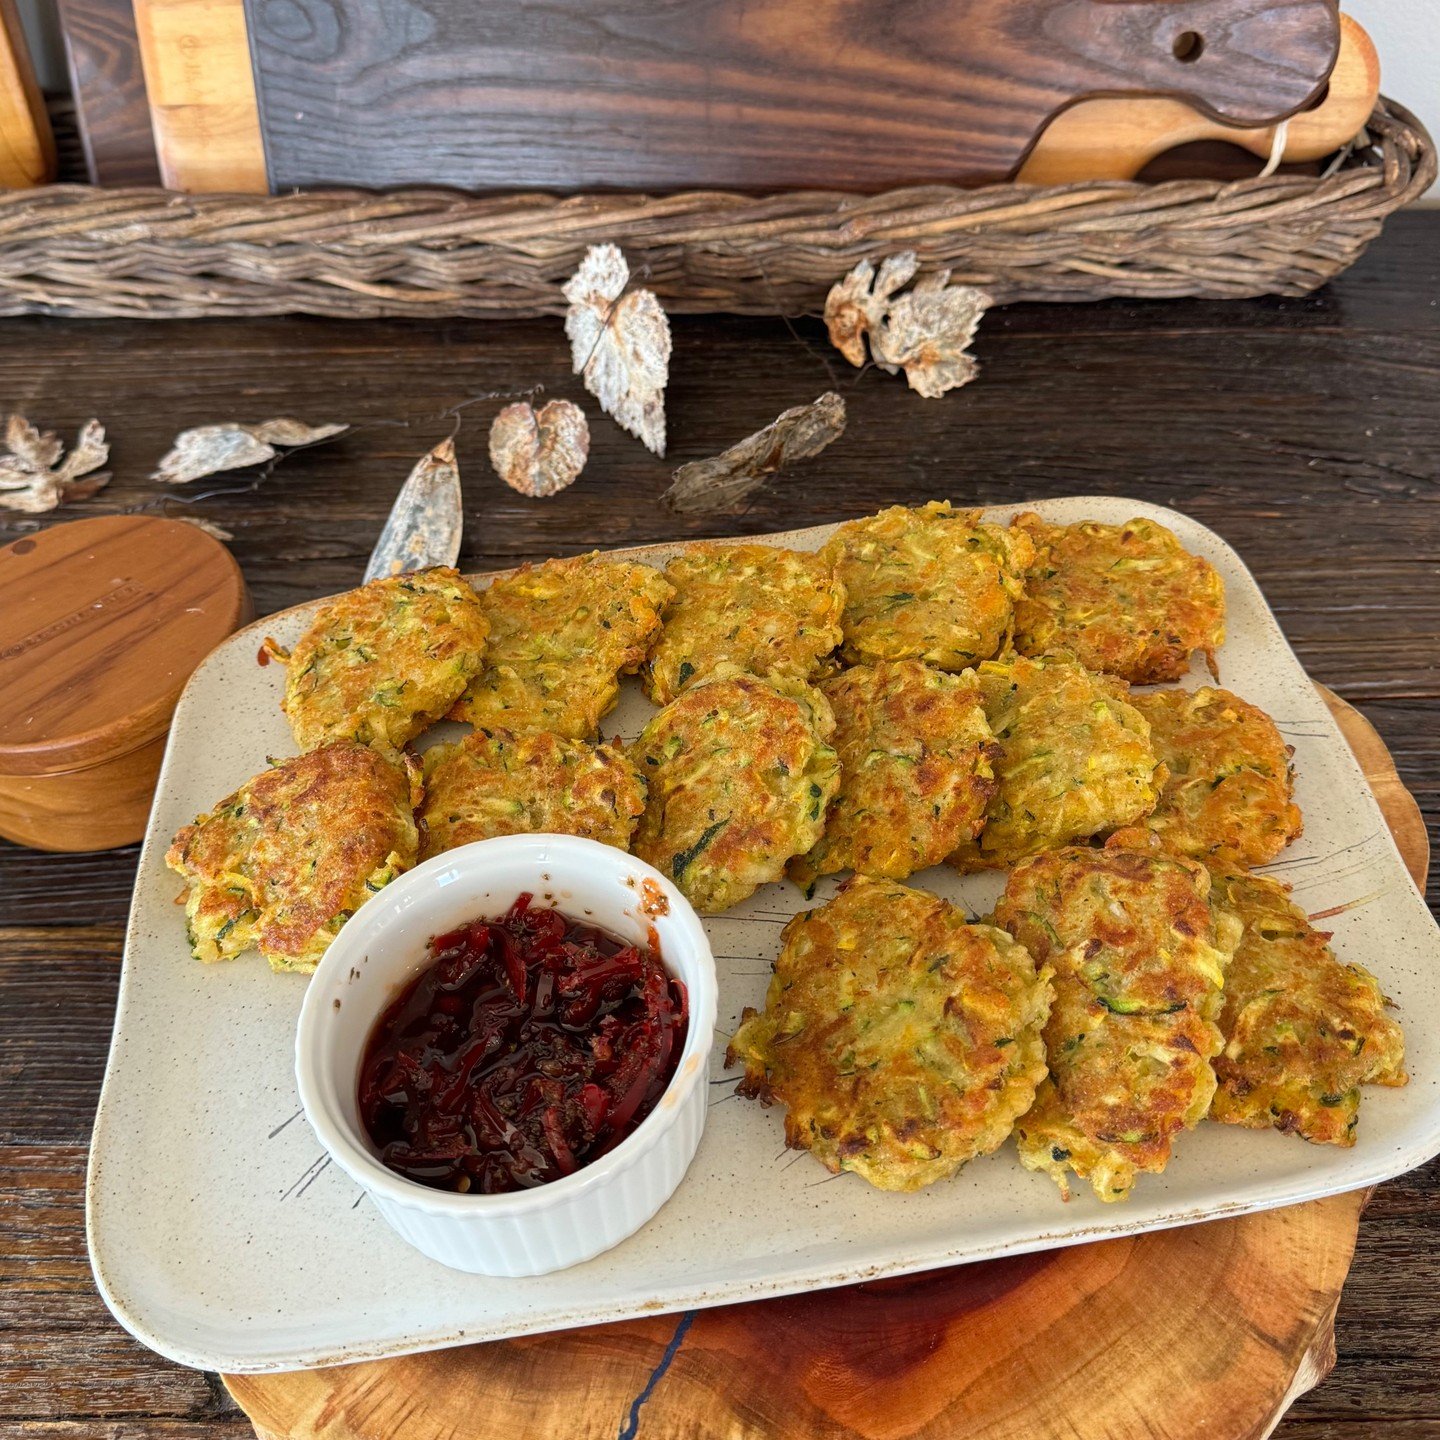 Zucchini Halloumi Fritters with Chili-Mint Jam from One Pot, Pan, Planet: A Greener Way to Cook for You and Your Family. Cook for April in Rainyday Bites Cookbook Club. Had some time and extra zucchini so I thought I would give these a try. Easy, qui